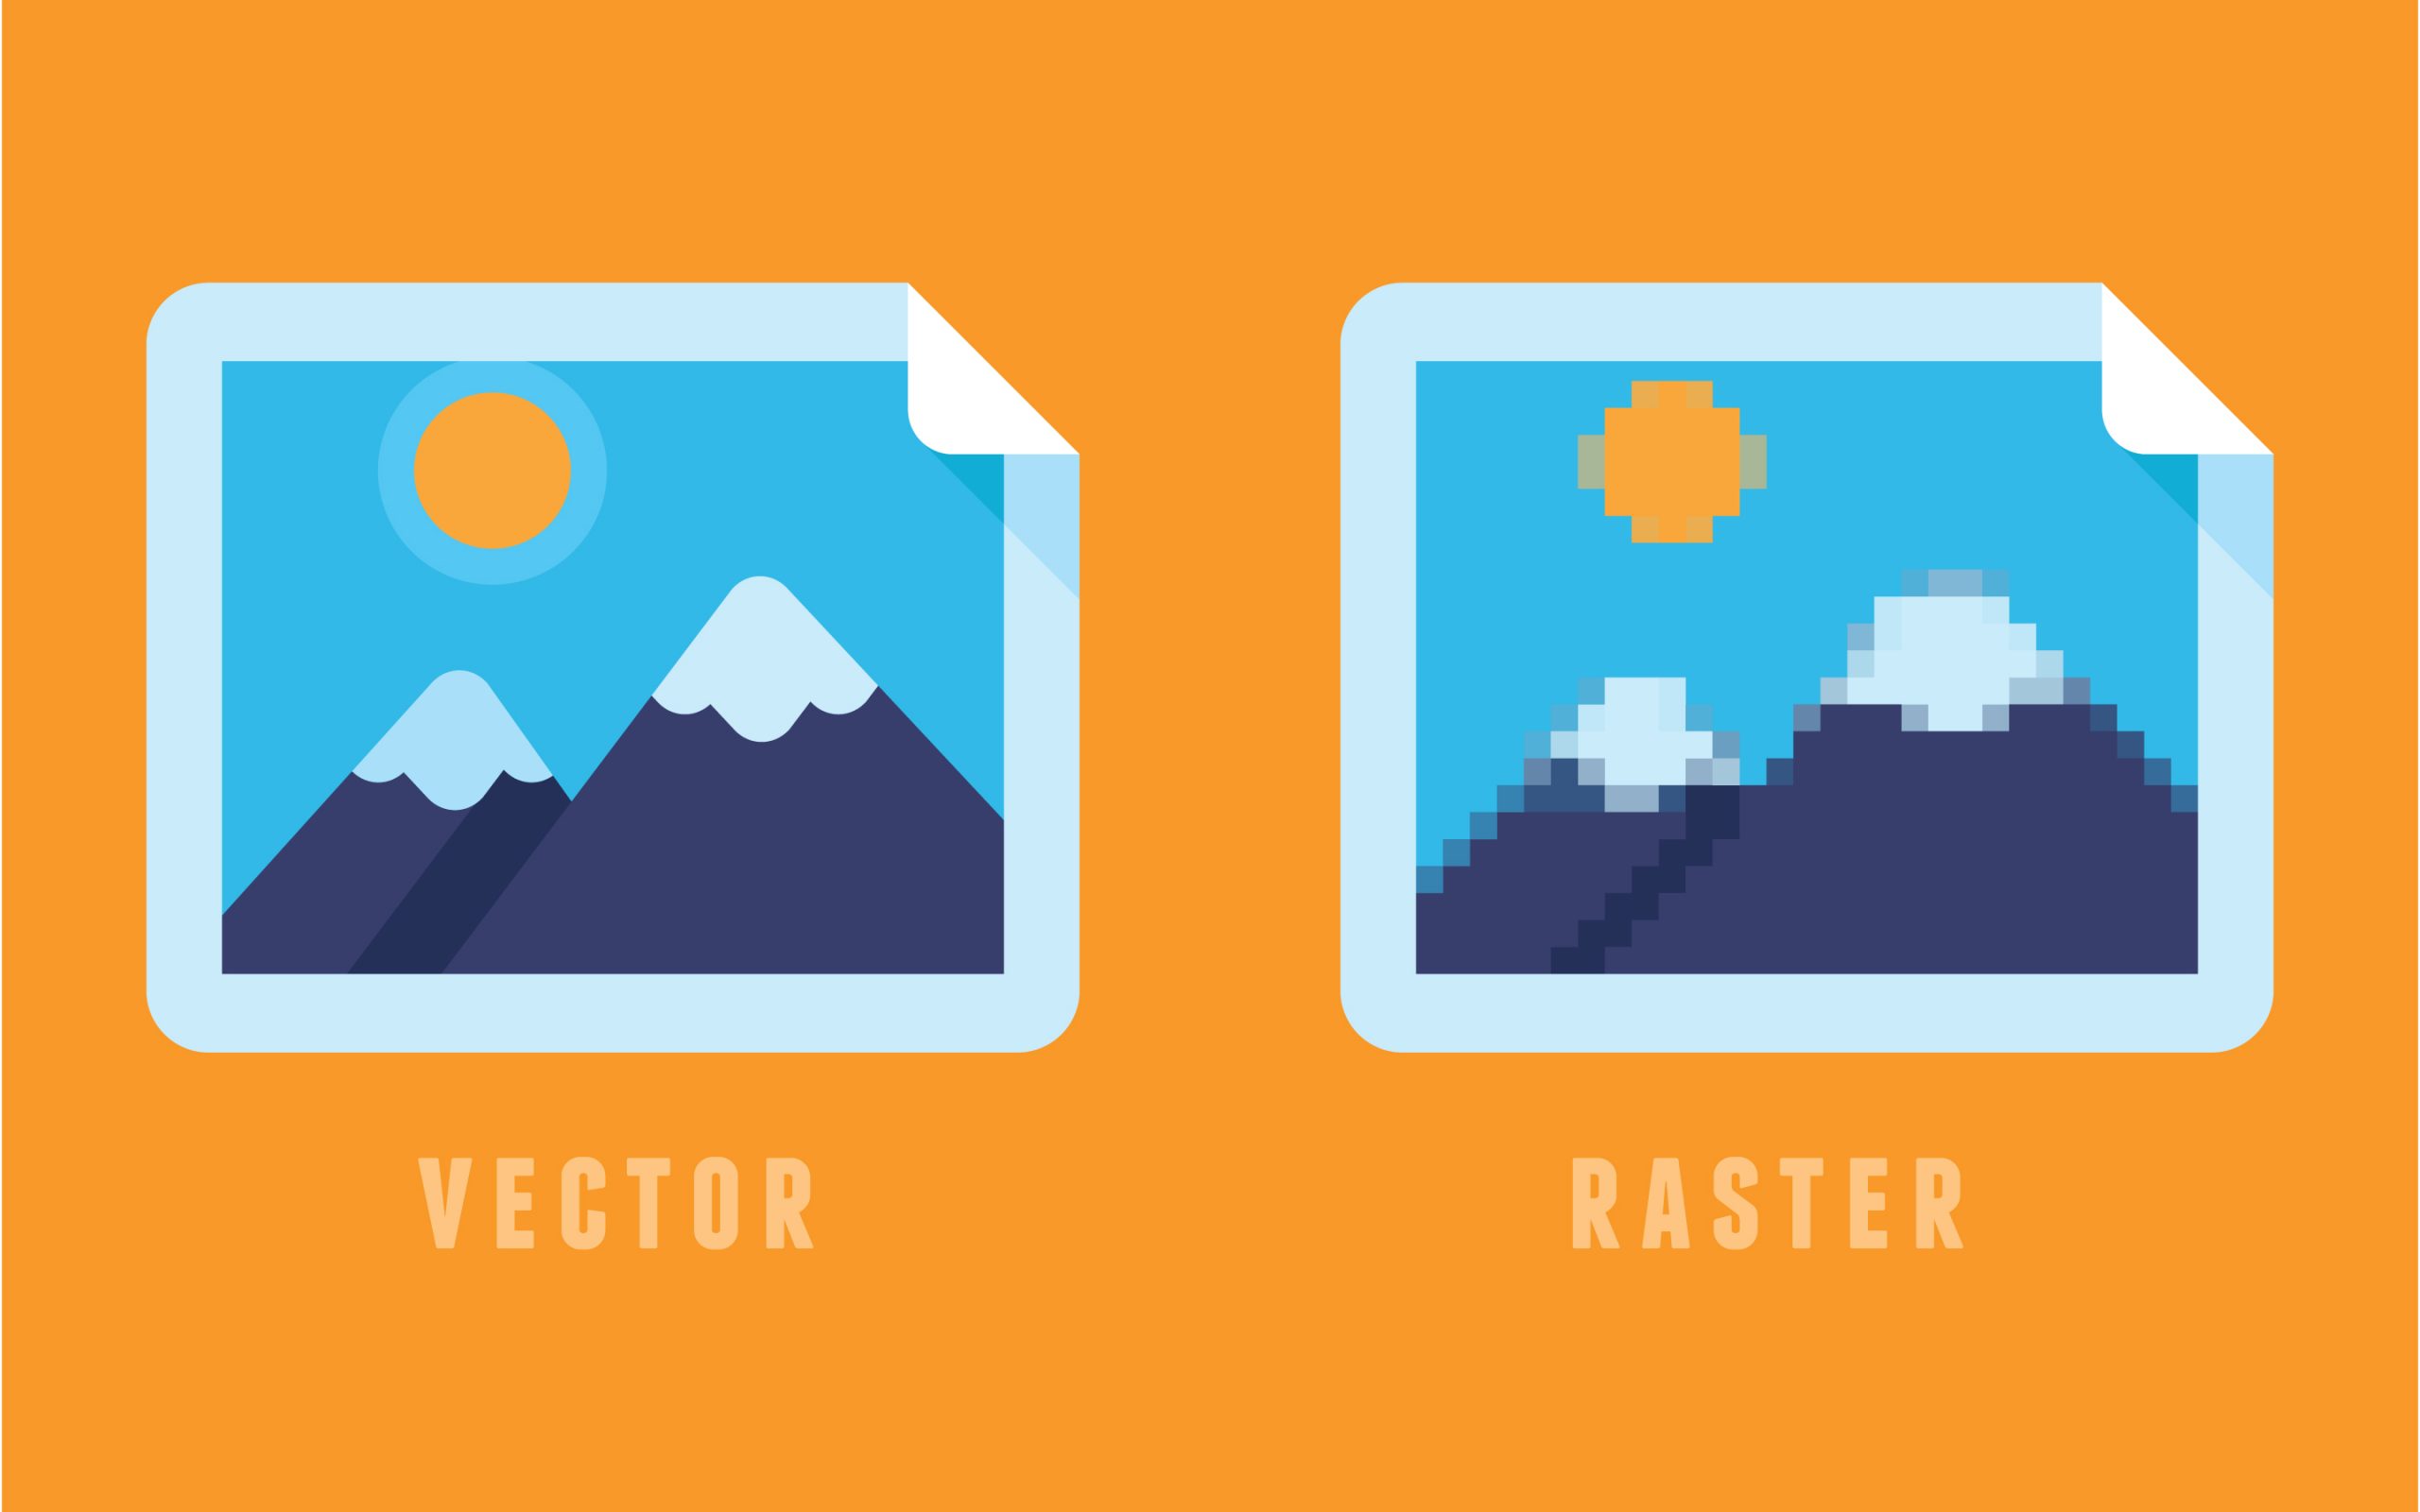 Vector-vs-Raster_Featured-Image